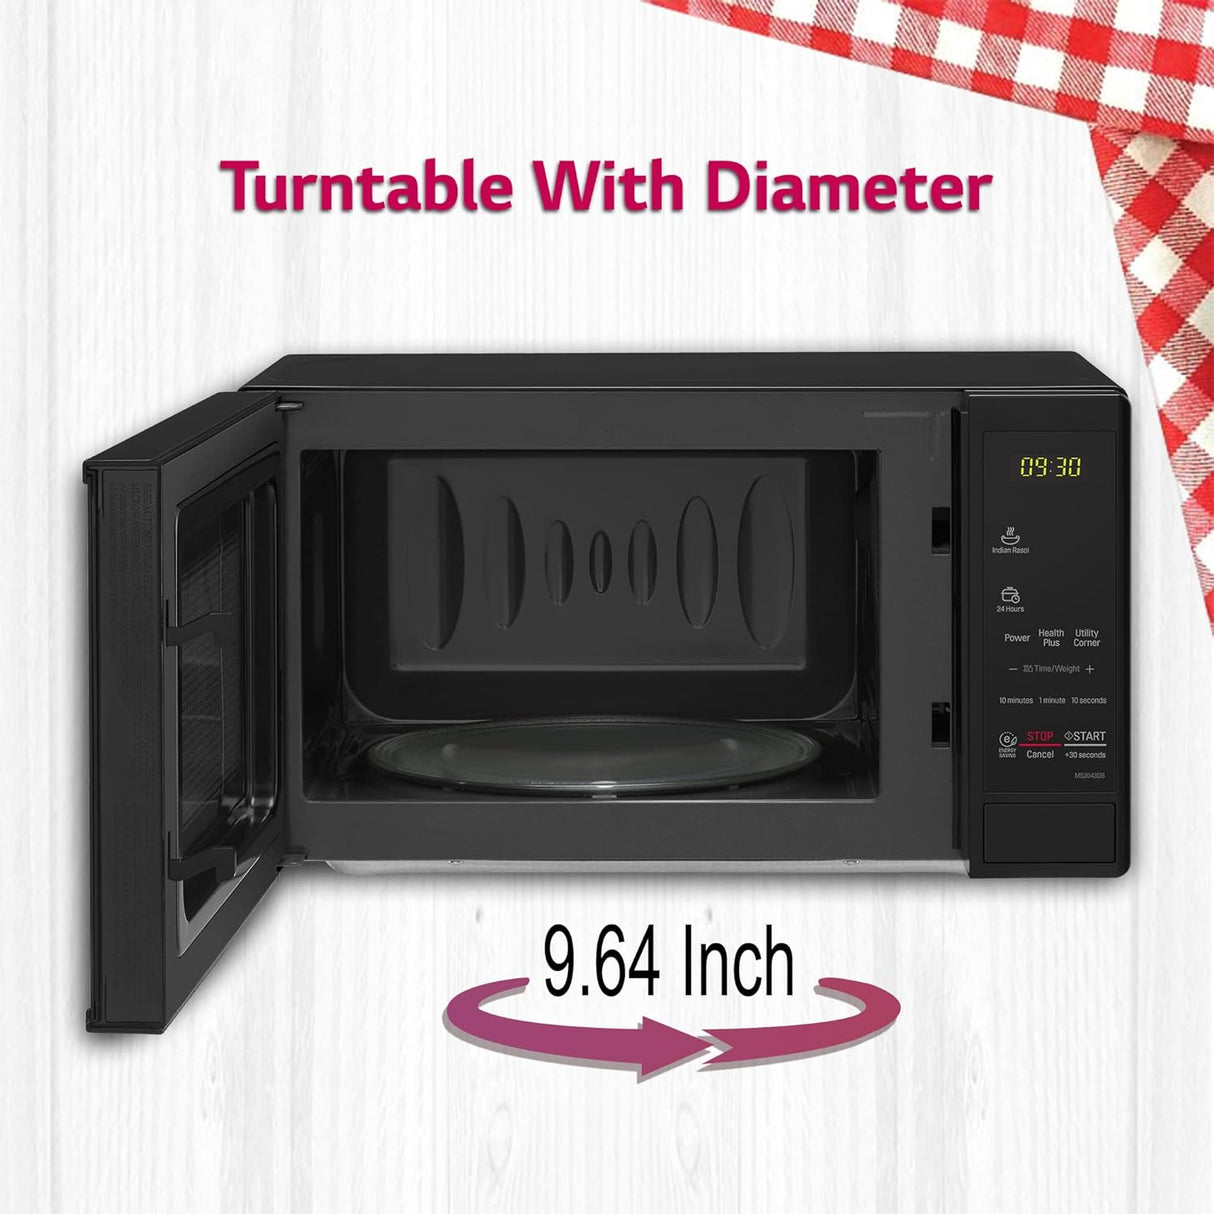 Best Microwave: LG 20 L Grill Microwave Oven - Advanced Cooking Technology